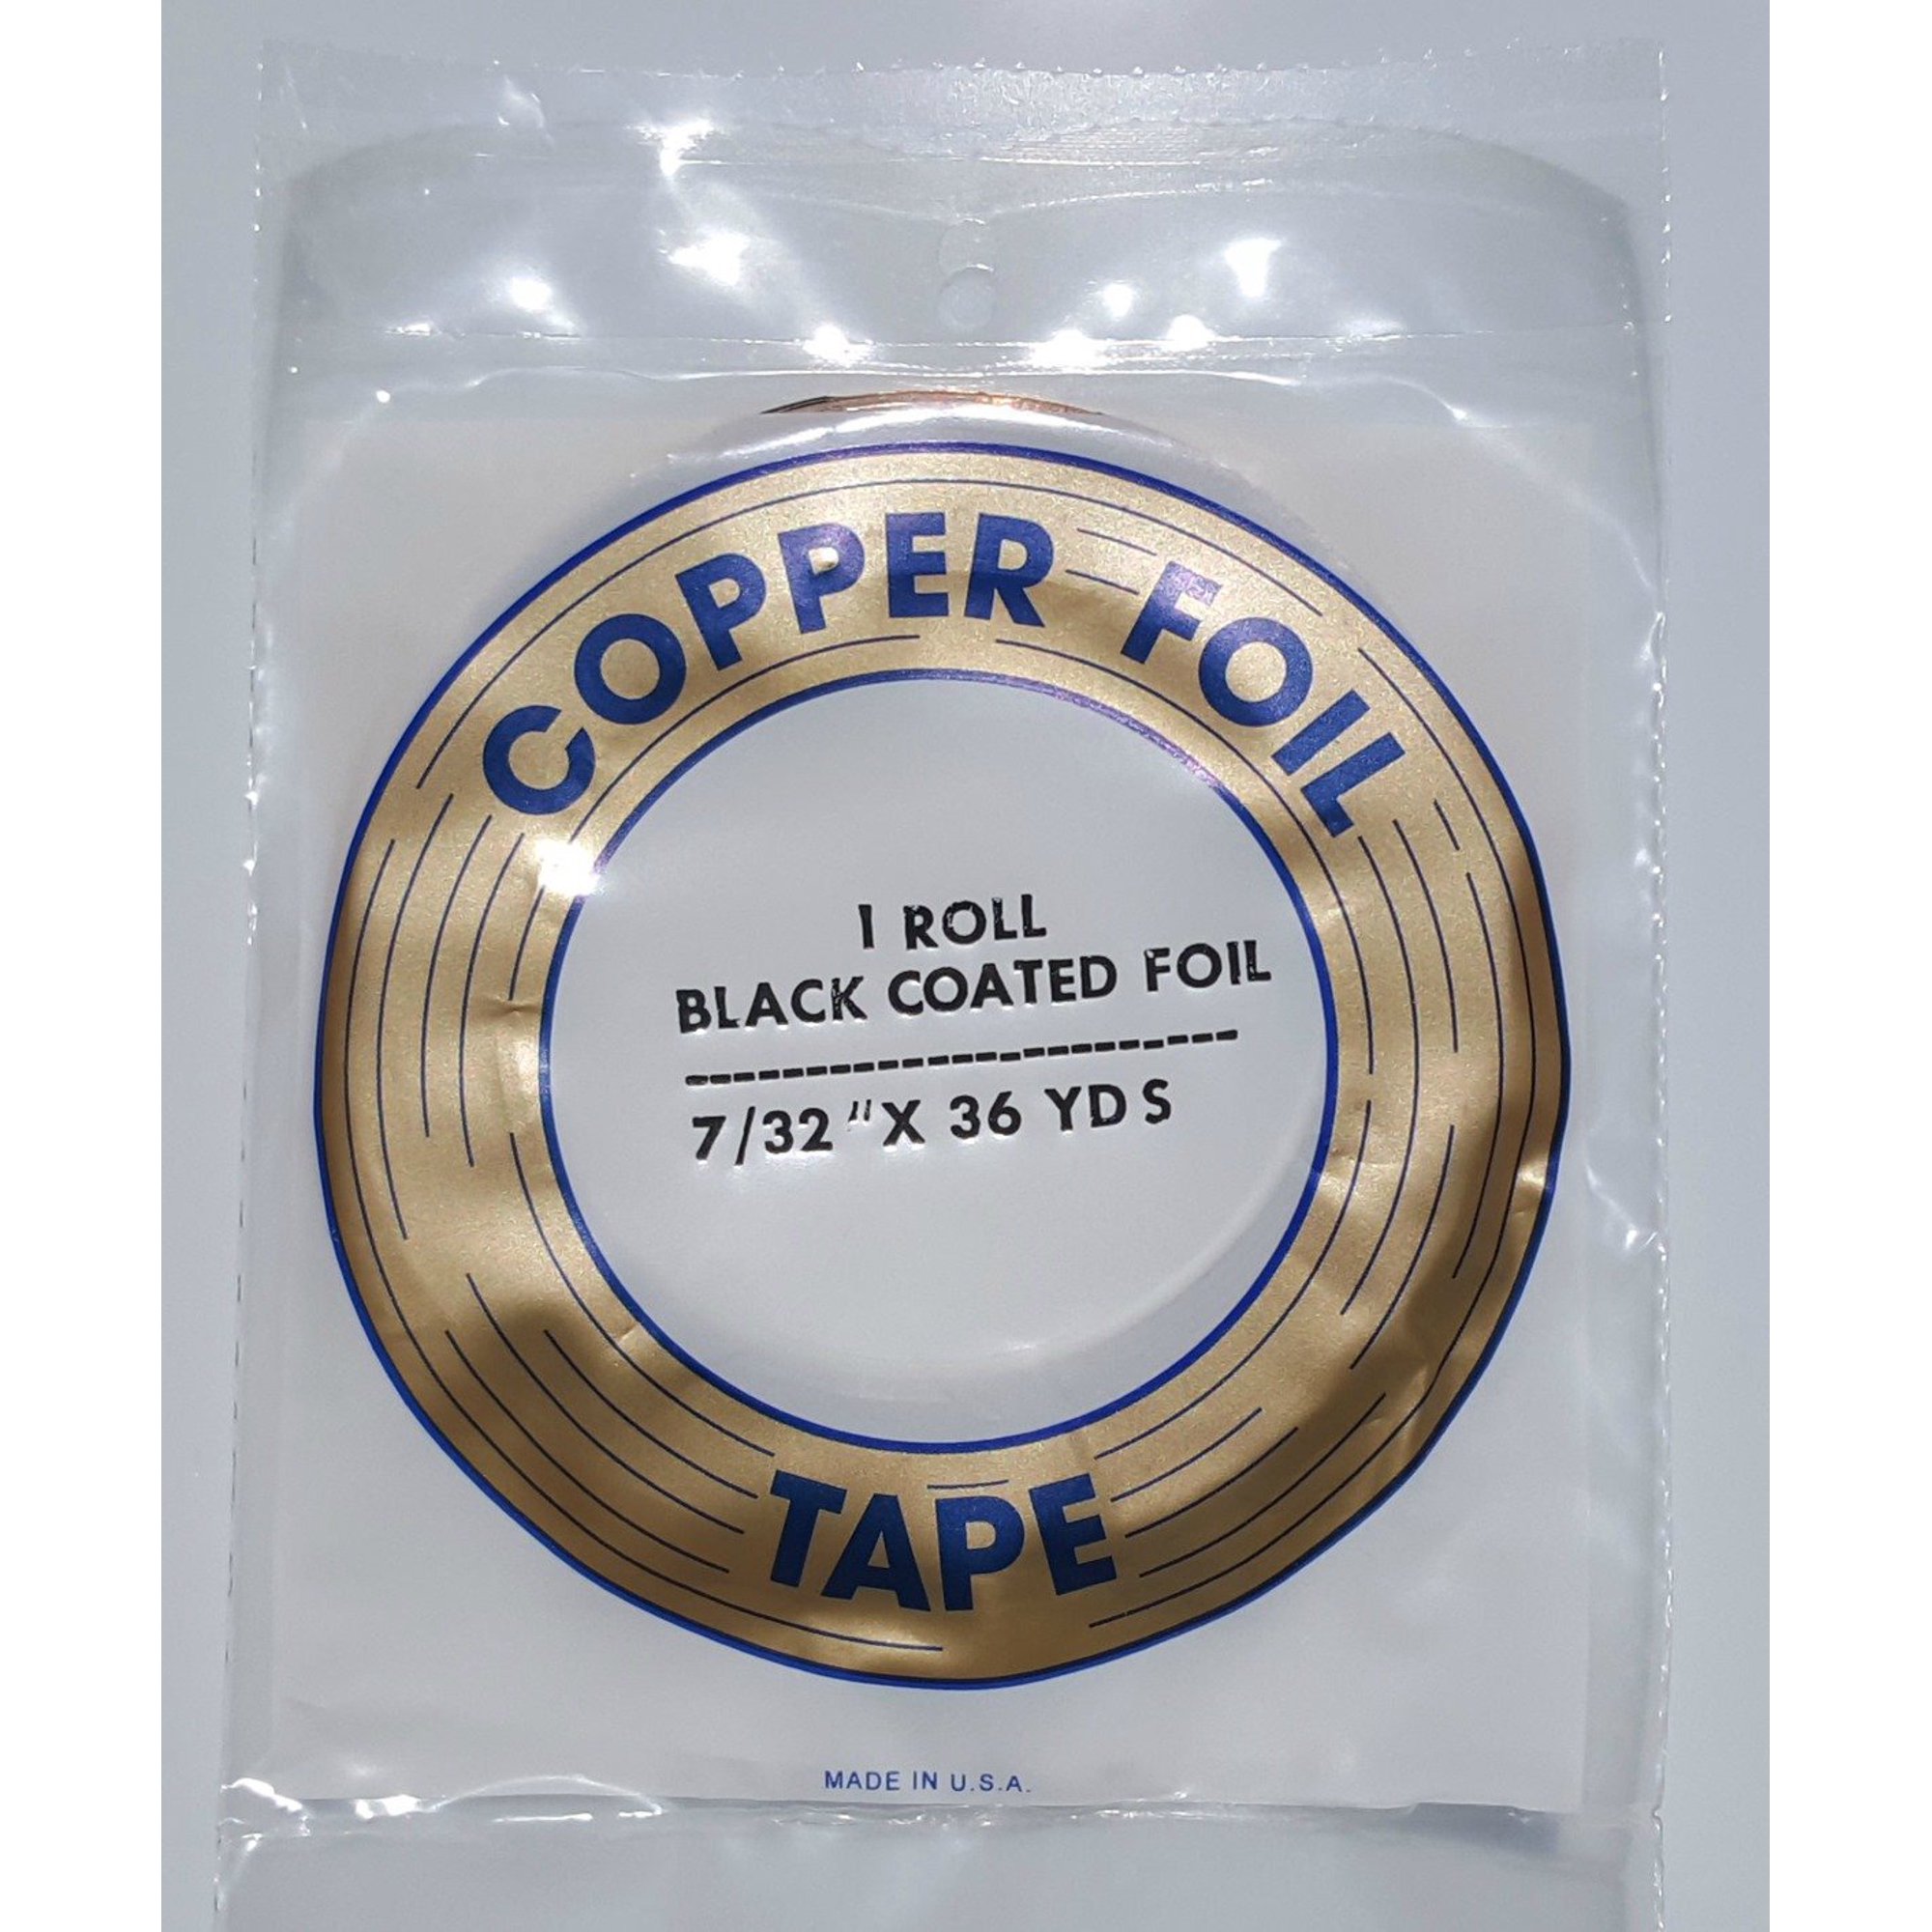 Edco Stained Glass Supplies / 1/2 Copper Foil Tape